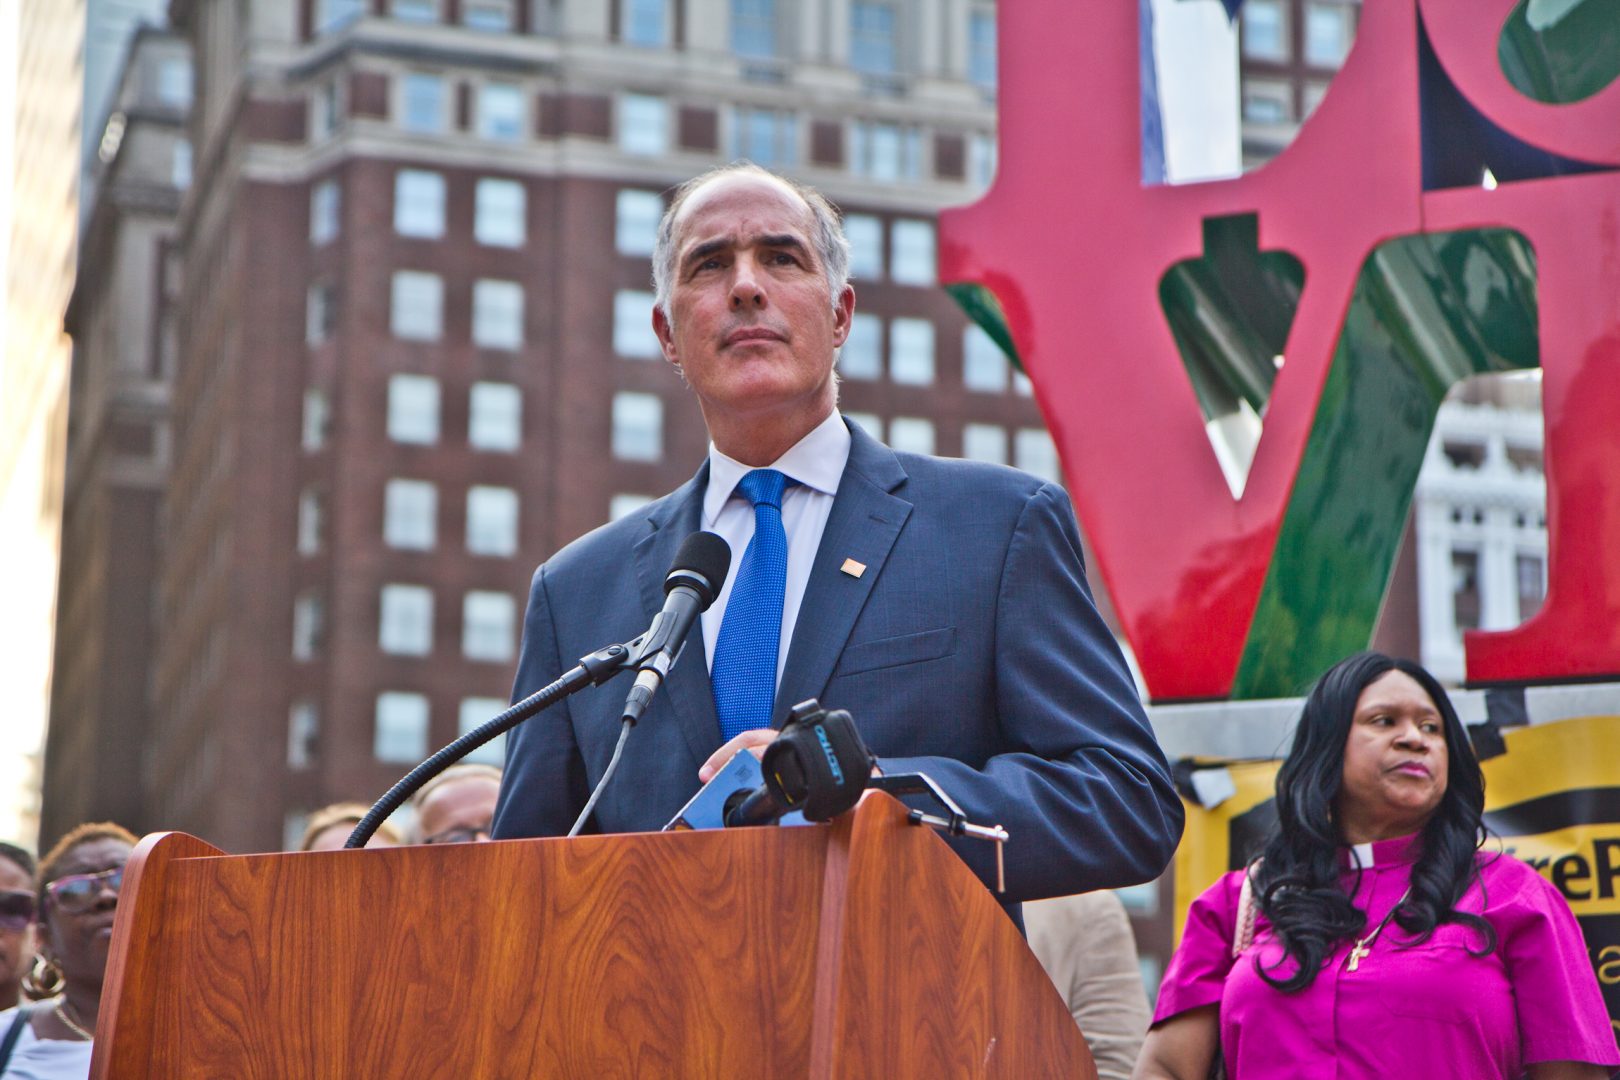 Senator Bob Casey lamented the loss of life to gun violence in Pennsylvania and nationally at a rally in Love Park Tuesday evening.